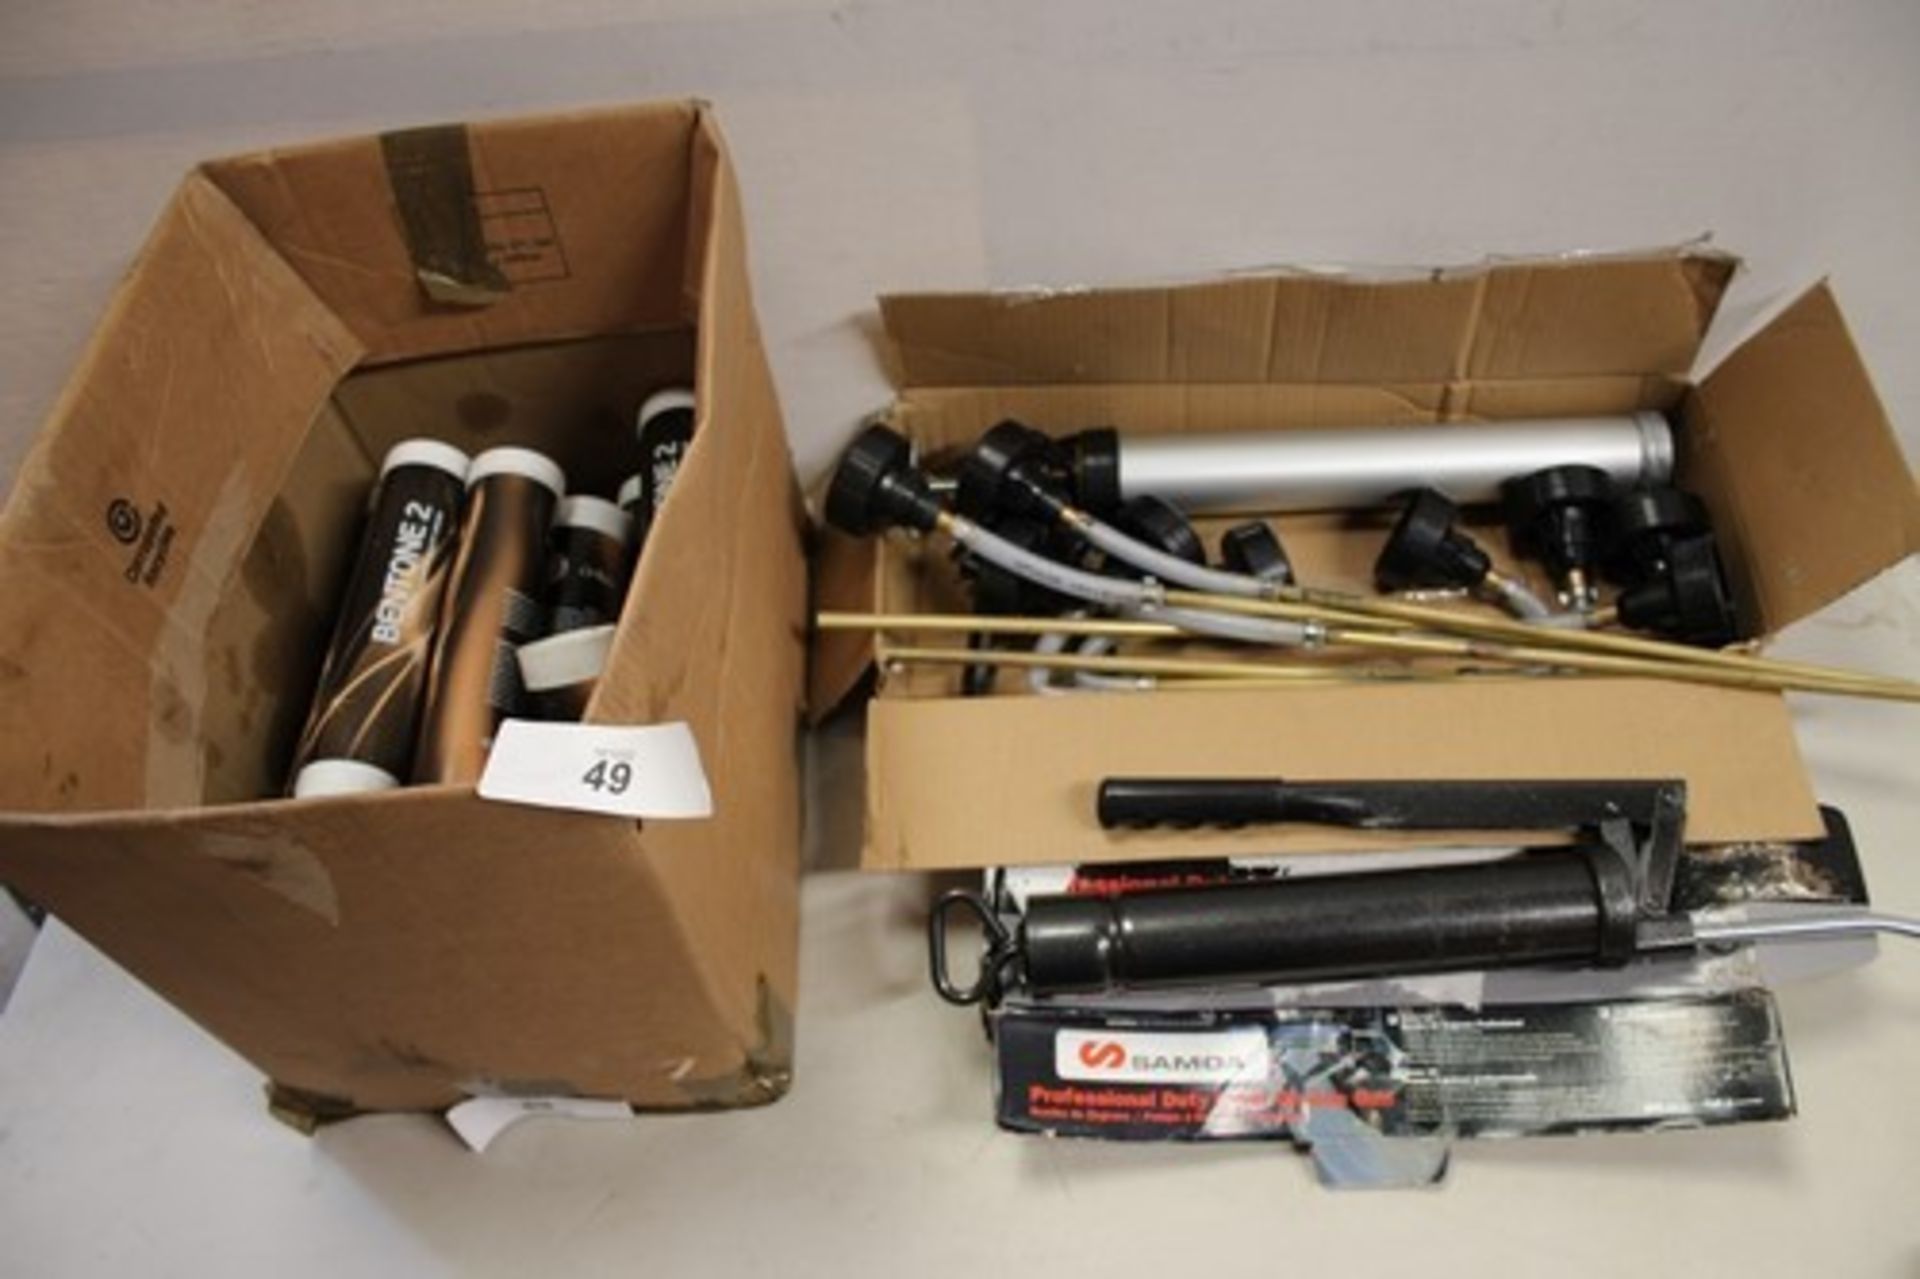 1 x Samoa grease gun, 1 x Eclipse injection gun, together with 18 x 400g tubes of Bentone 2 grease -